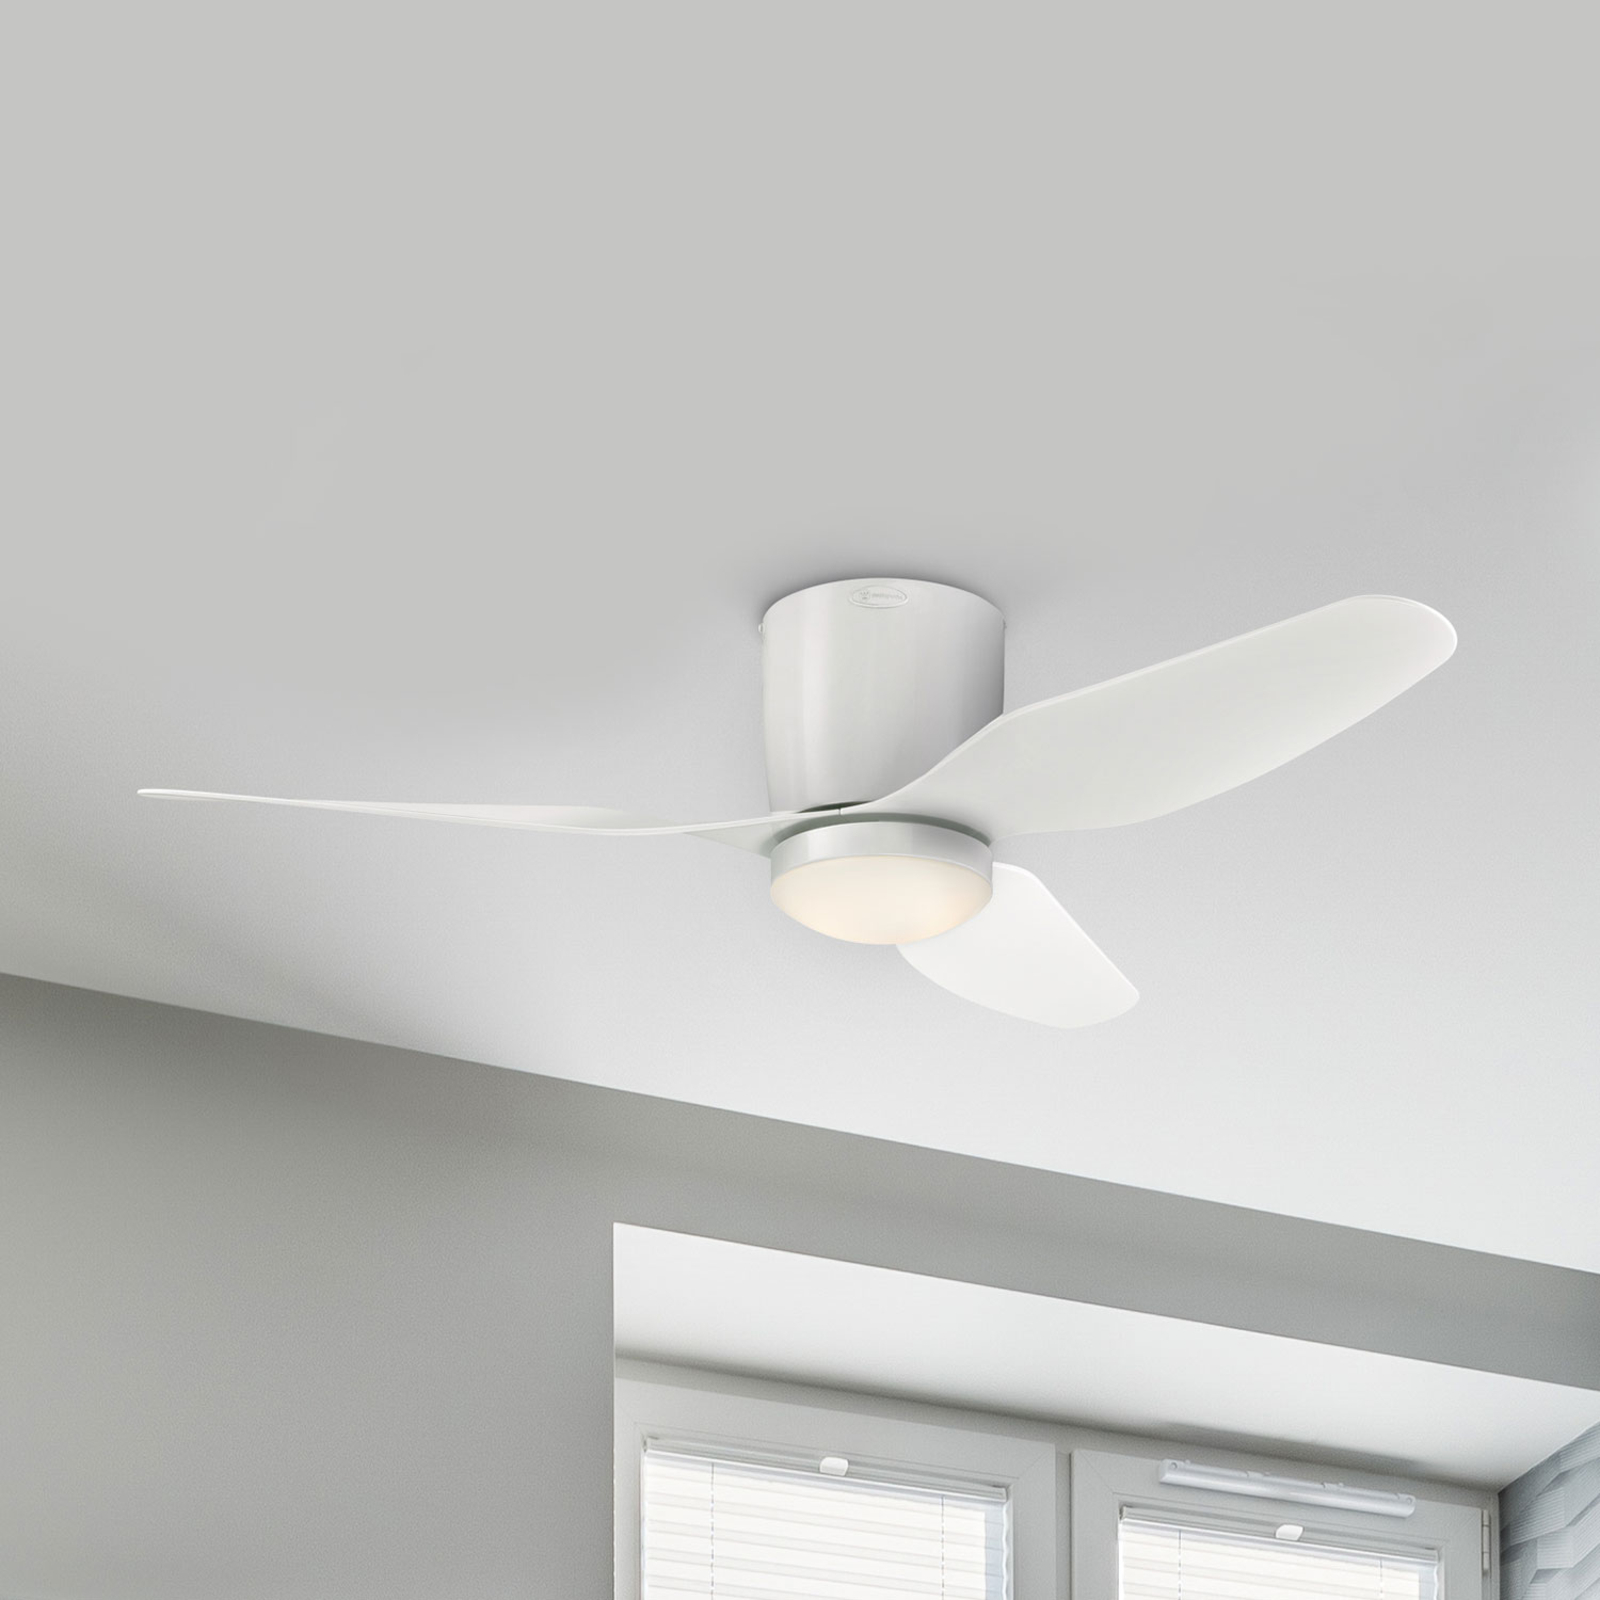 Westinghouse Lighting Carla 117 cm White Indoor Ceiling Fan with Light and Remote Control Dimmable LED Light Fixture with Opal Frosted Glass 